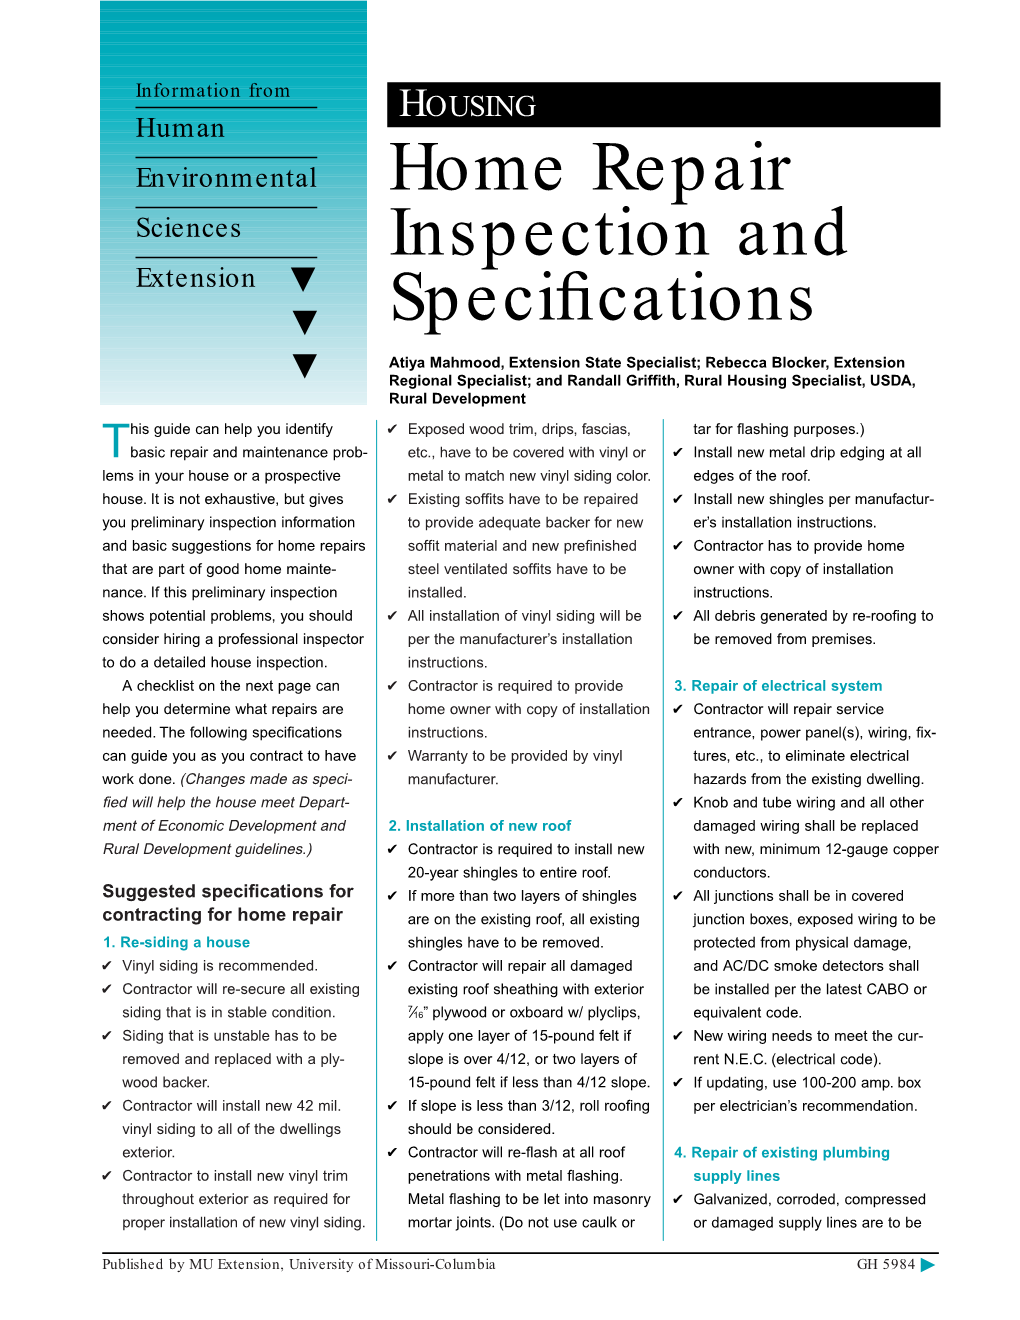 Home Repair Inspection and Specifications